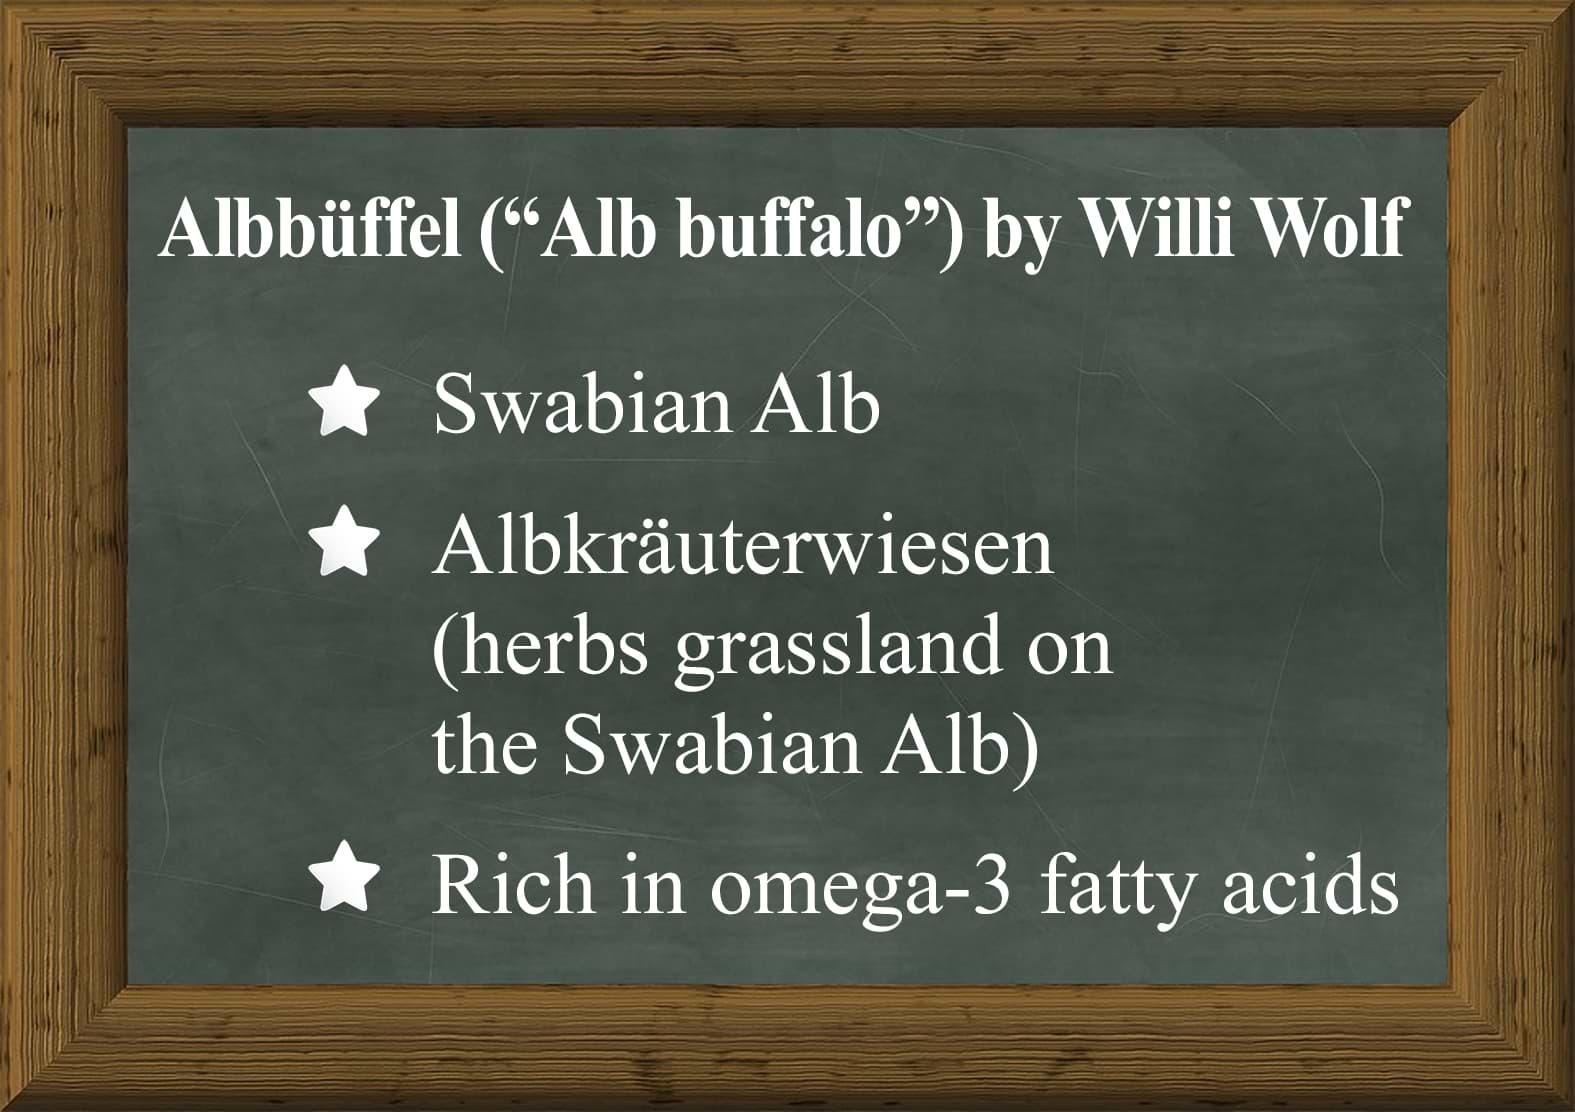 From the Swabian Alb region, we offer burgers made with meat from the Albbüffel (“Alb buffalo”).